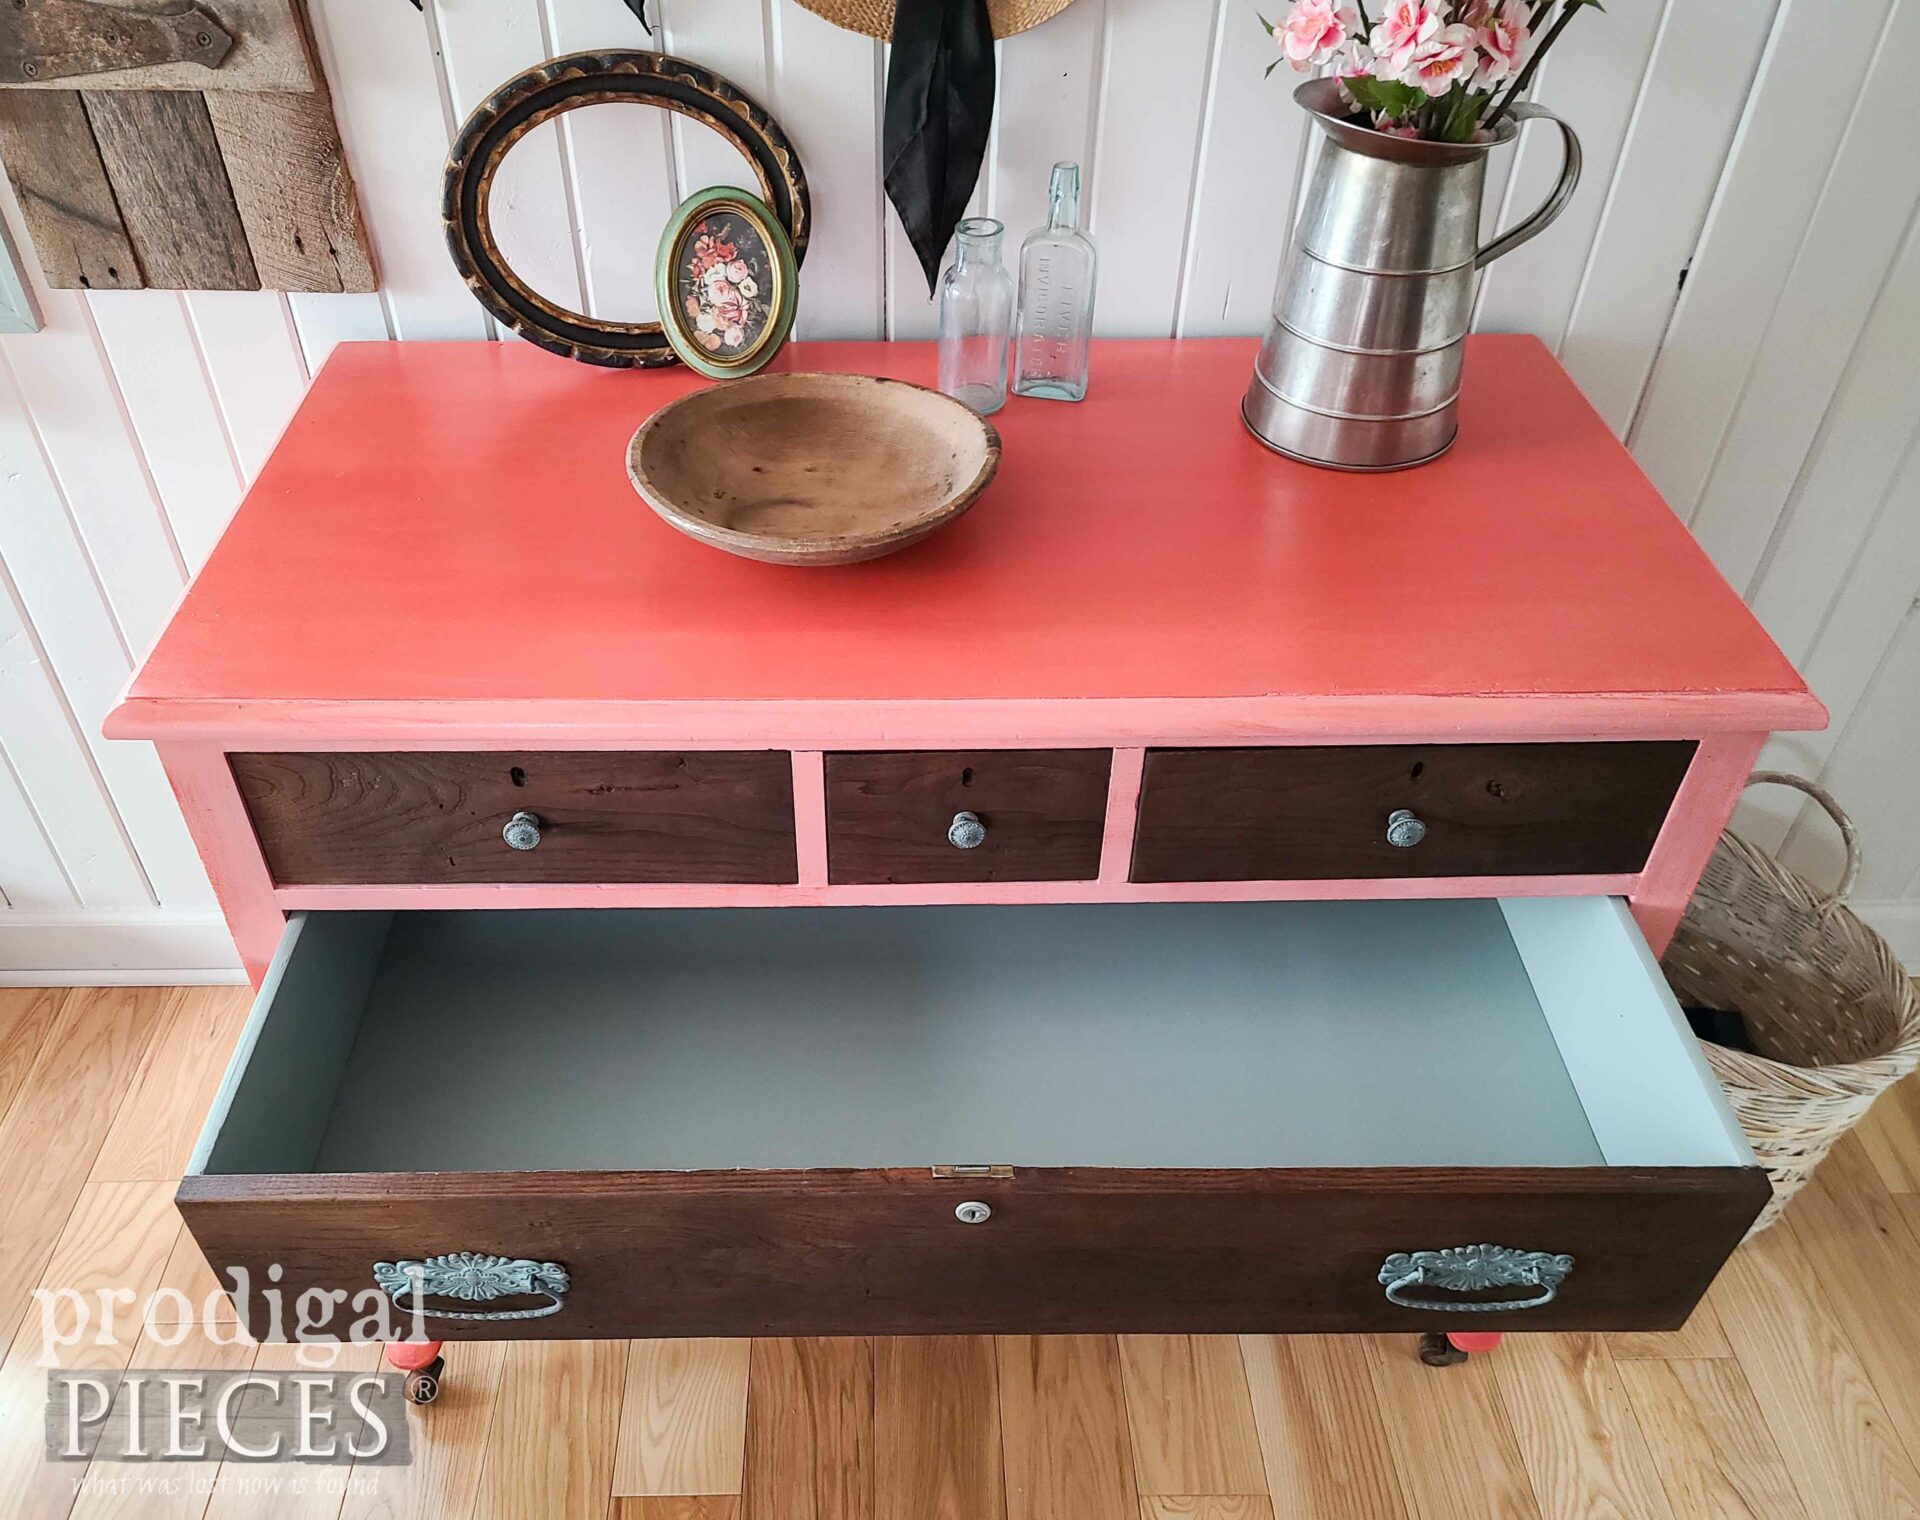 Slate Green Blue Painted Drawers | prodgialpieces.com #prodigalpieces #dresser #furniture